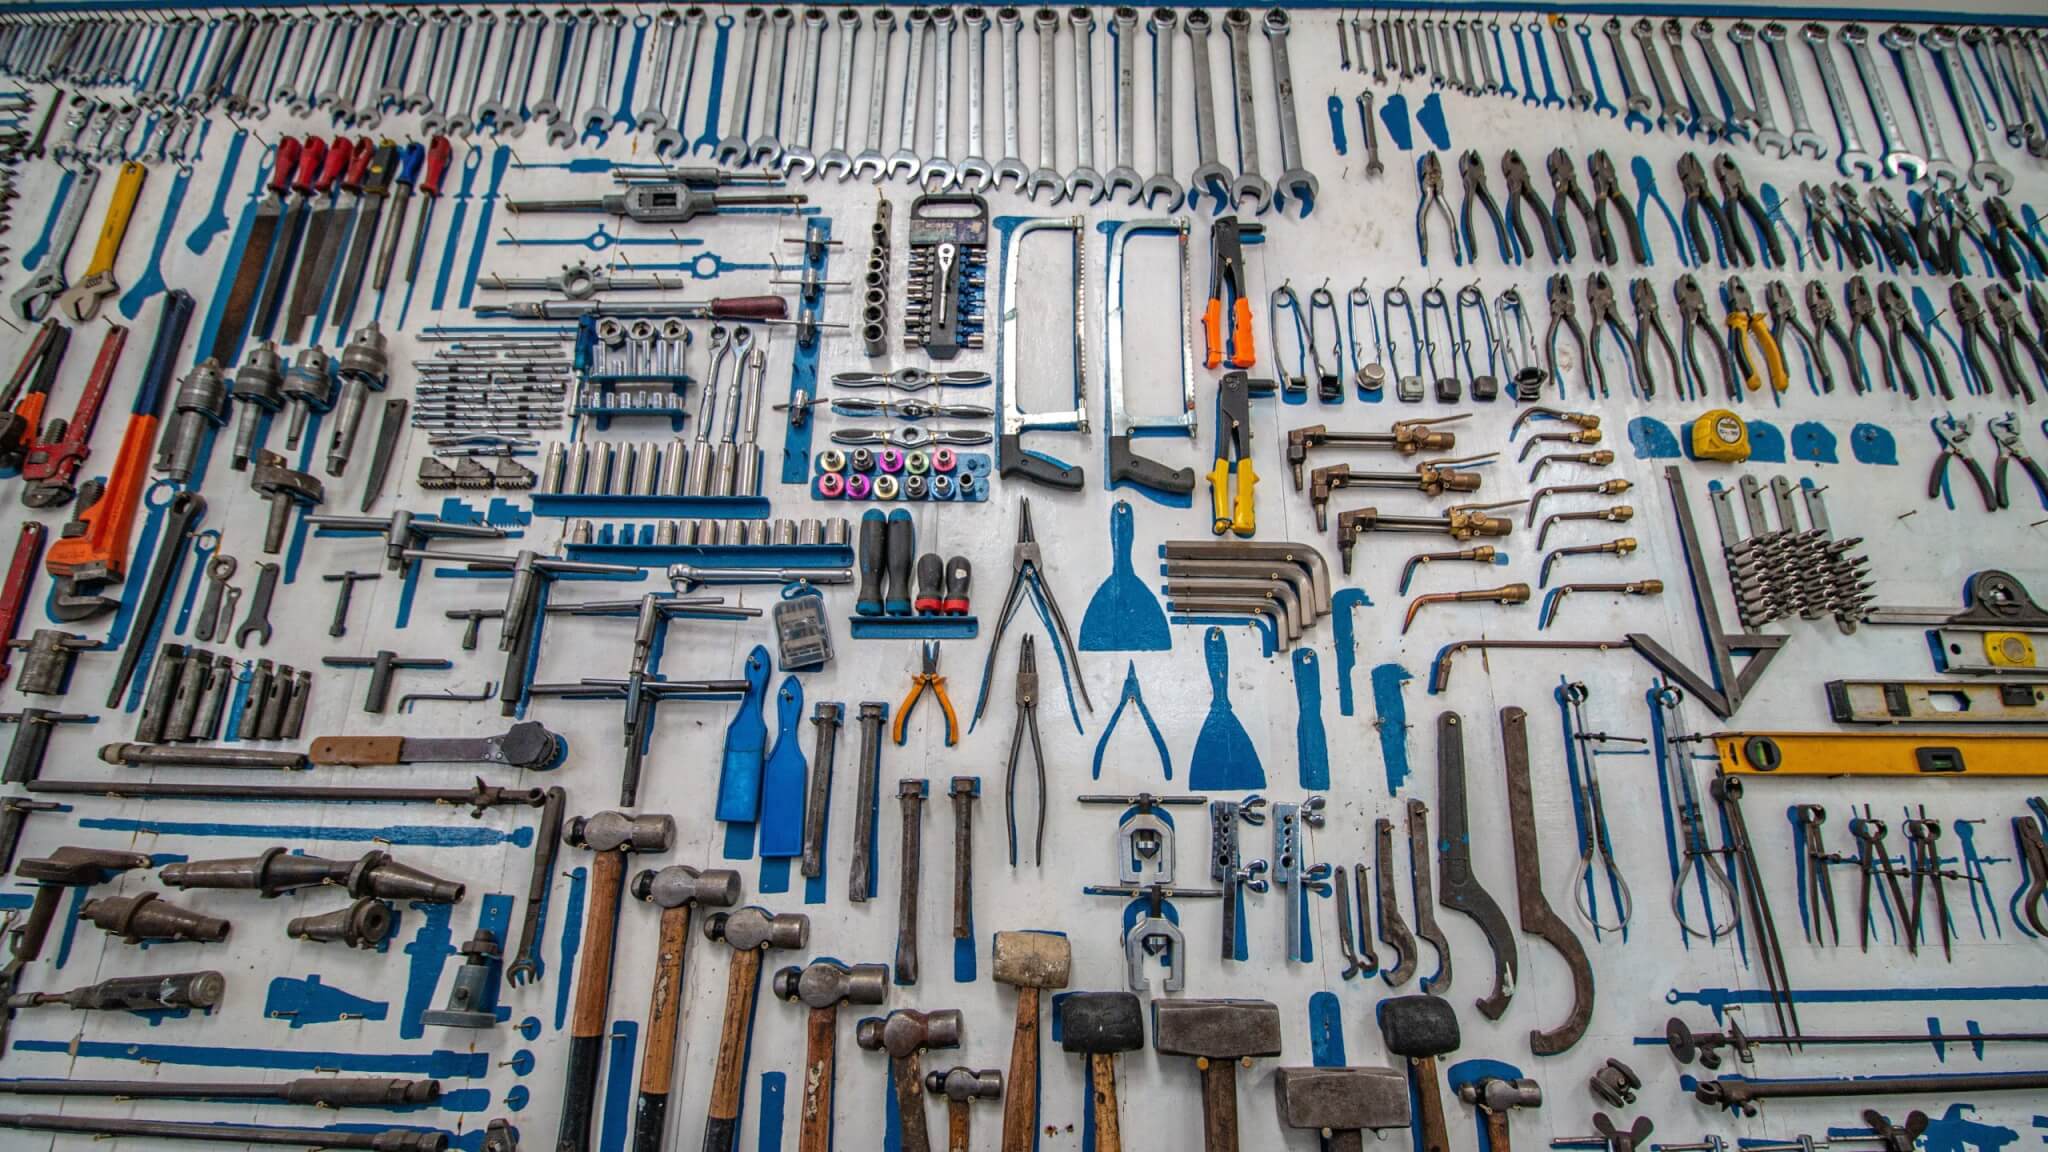 an absolute plethora of various tools in many shapes, sizes, and colors, primarily blue scraper tools but also a family of mallets and an array of wrenches never before seen by the humble eyes of man